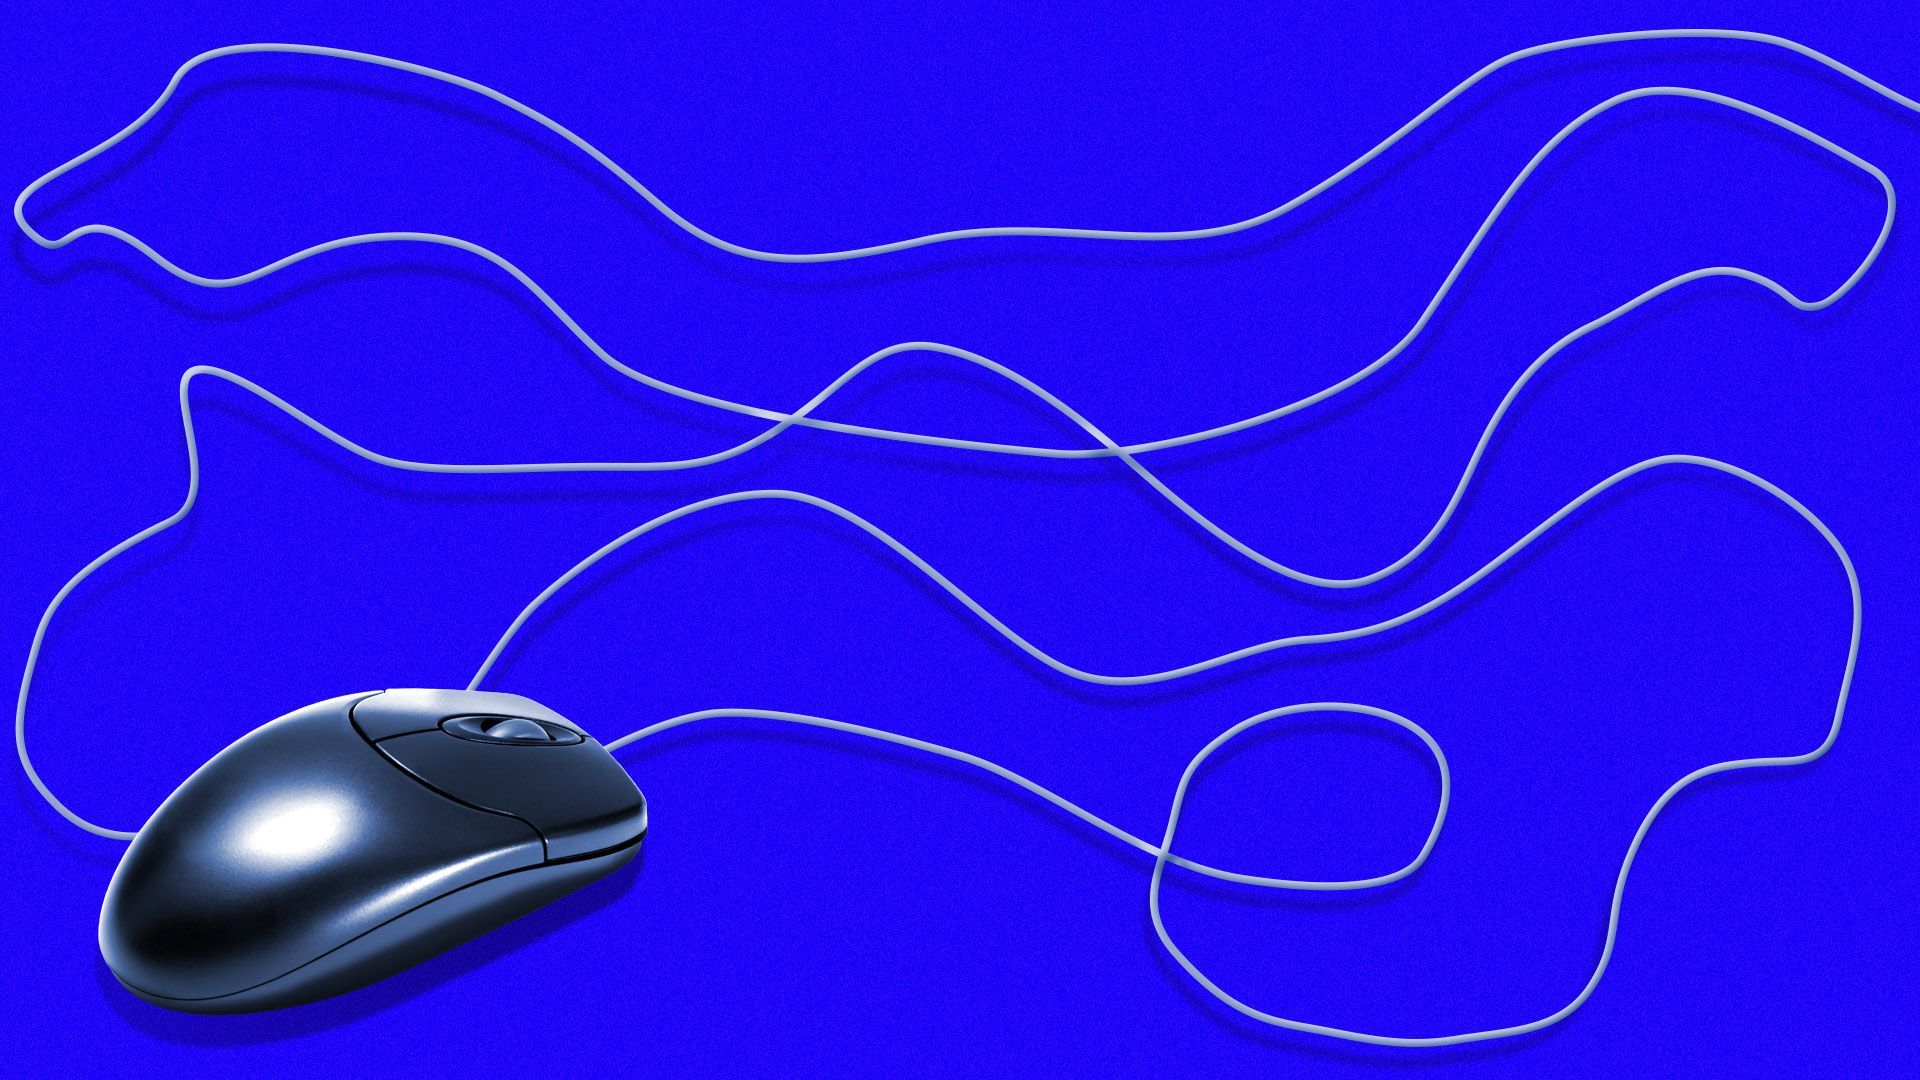 Illustration of a computer mouse with an extremely long cord 